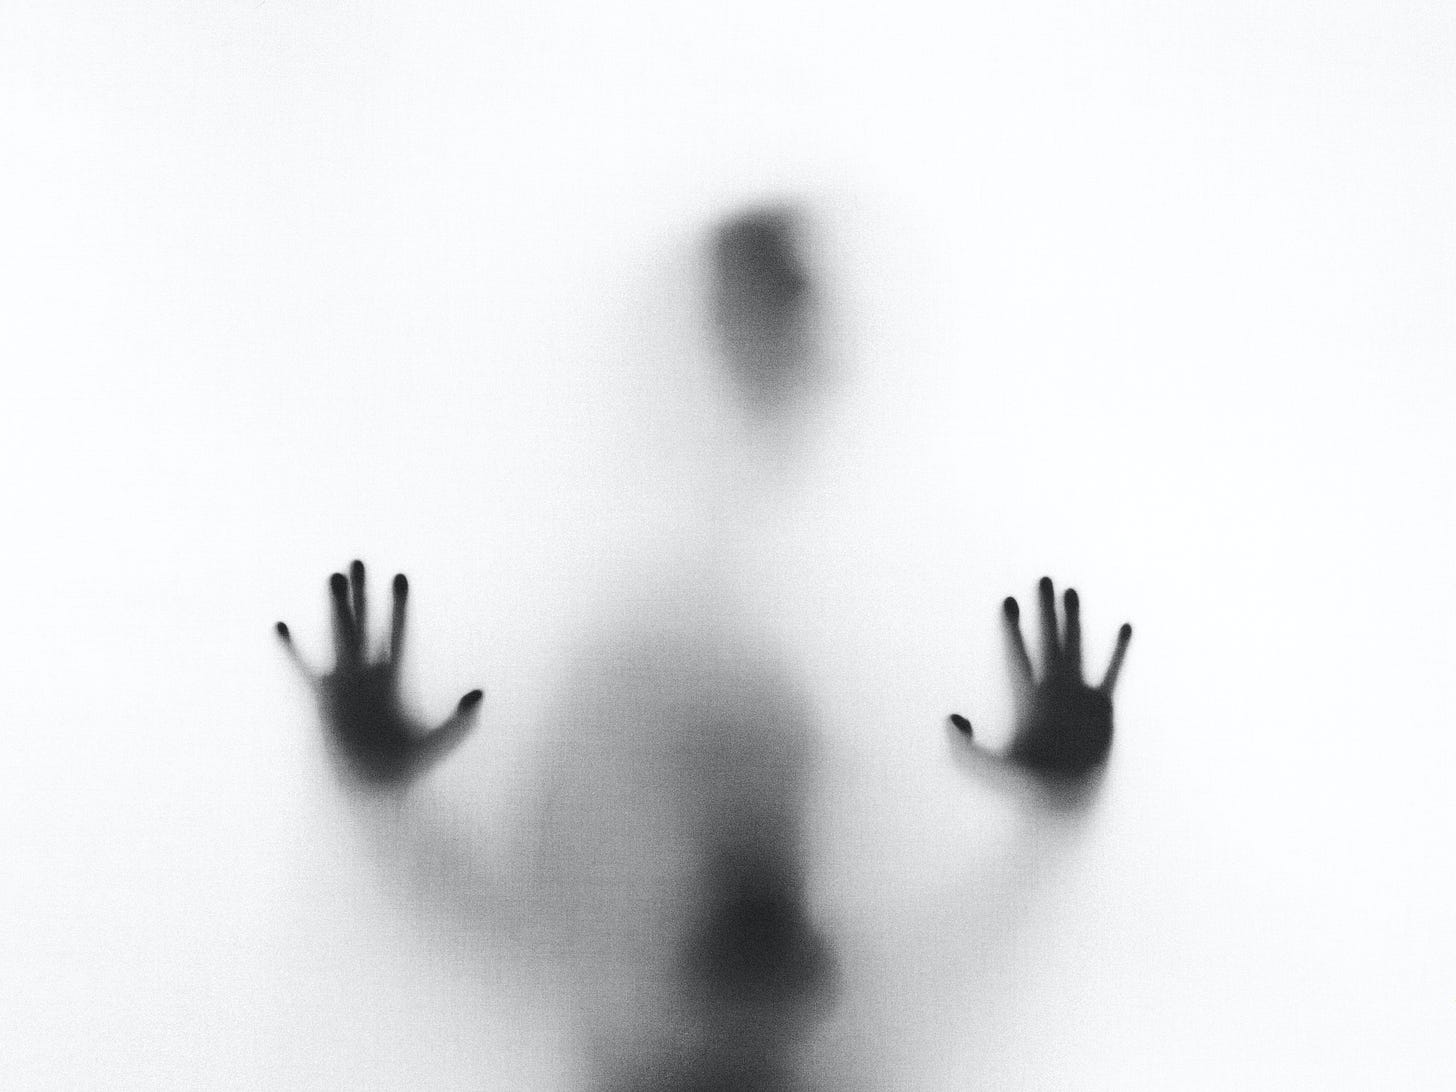 A photo of a person behind fog